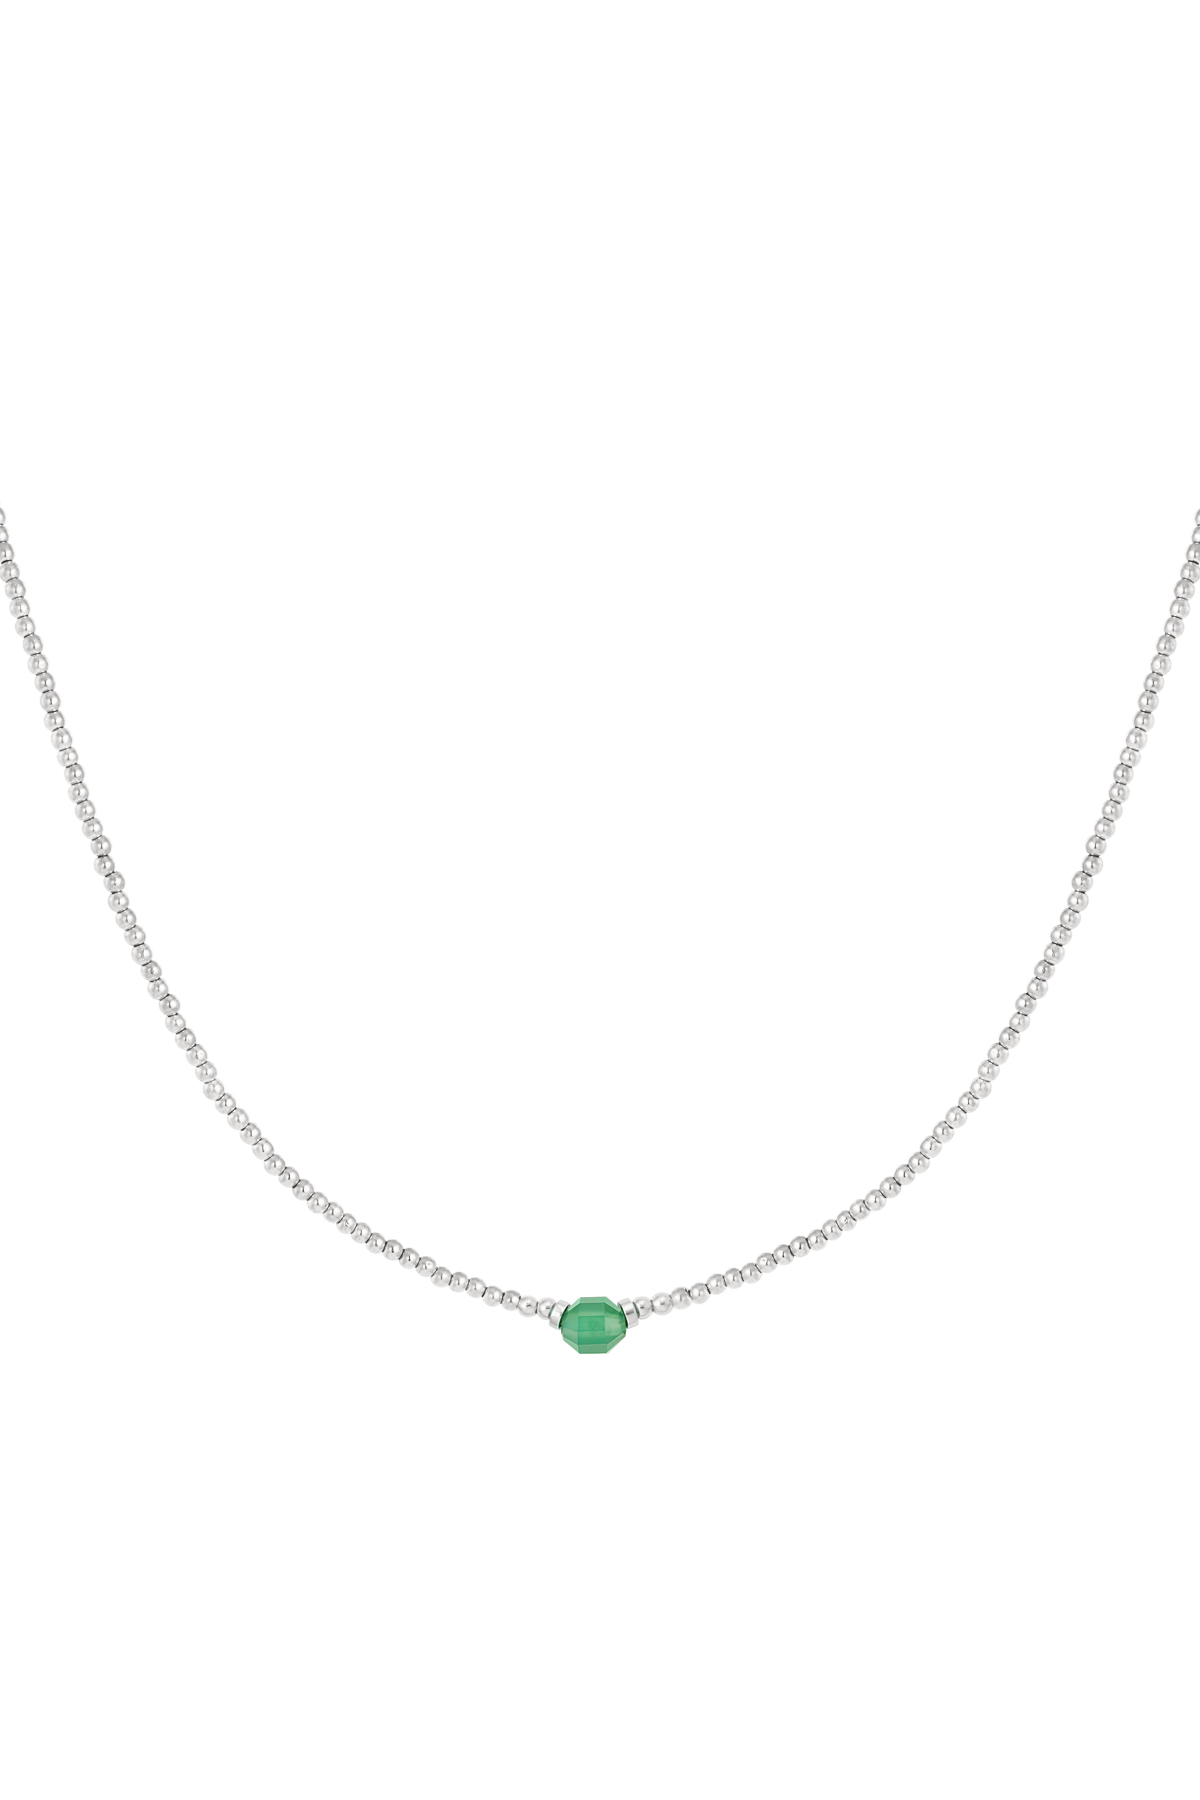 Stainless Steel Natural Stone Pendant Beaded Chain Necklace - Green & Silver 